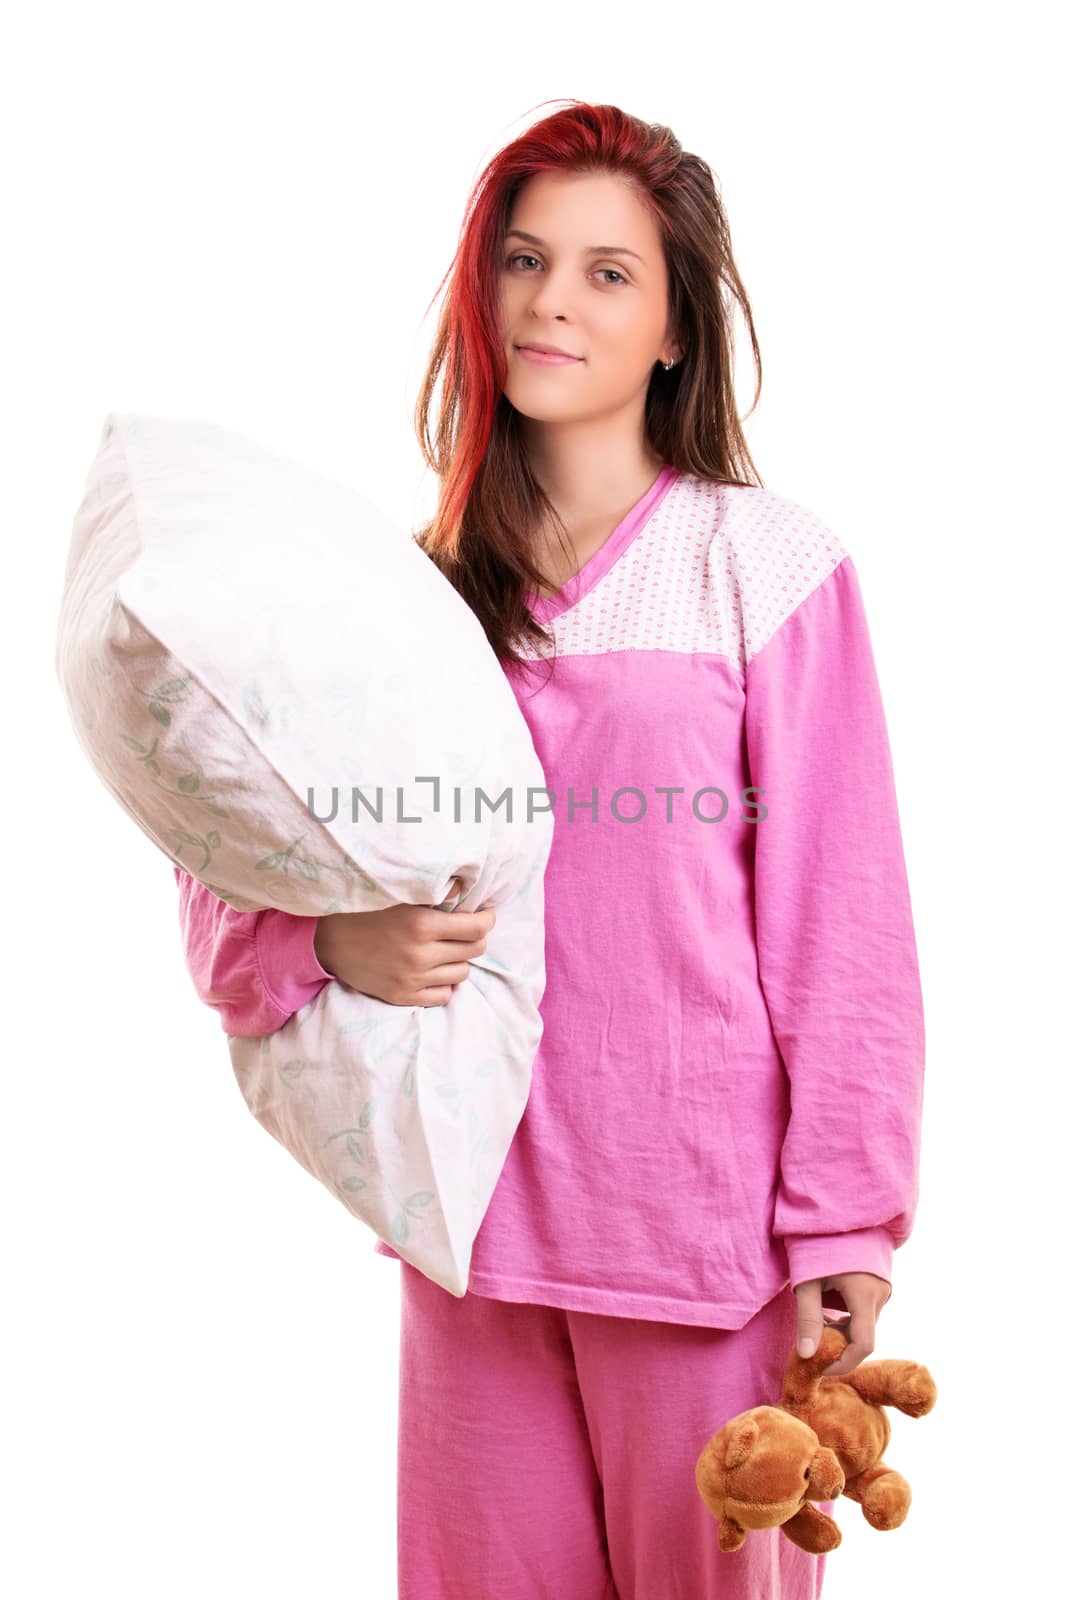 Beautiful smiling young girl in pink pajamas holding a pillow and a teddy bear, preparing to go to sleep, isolated on white background. Sleep and relaxation concept.